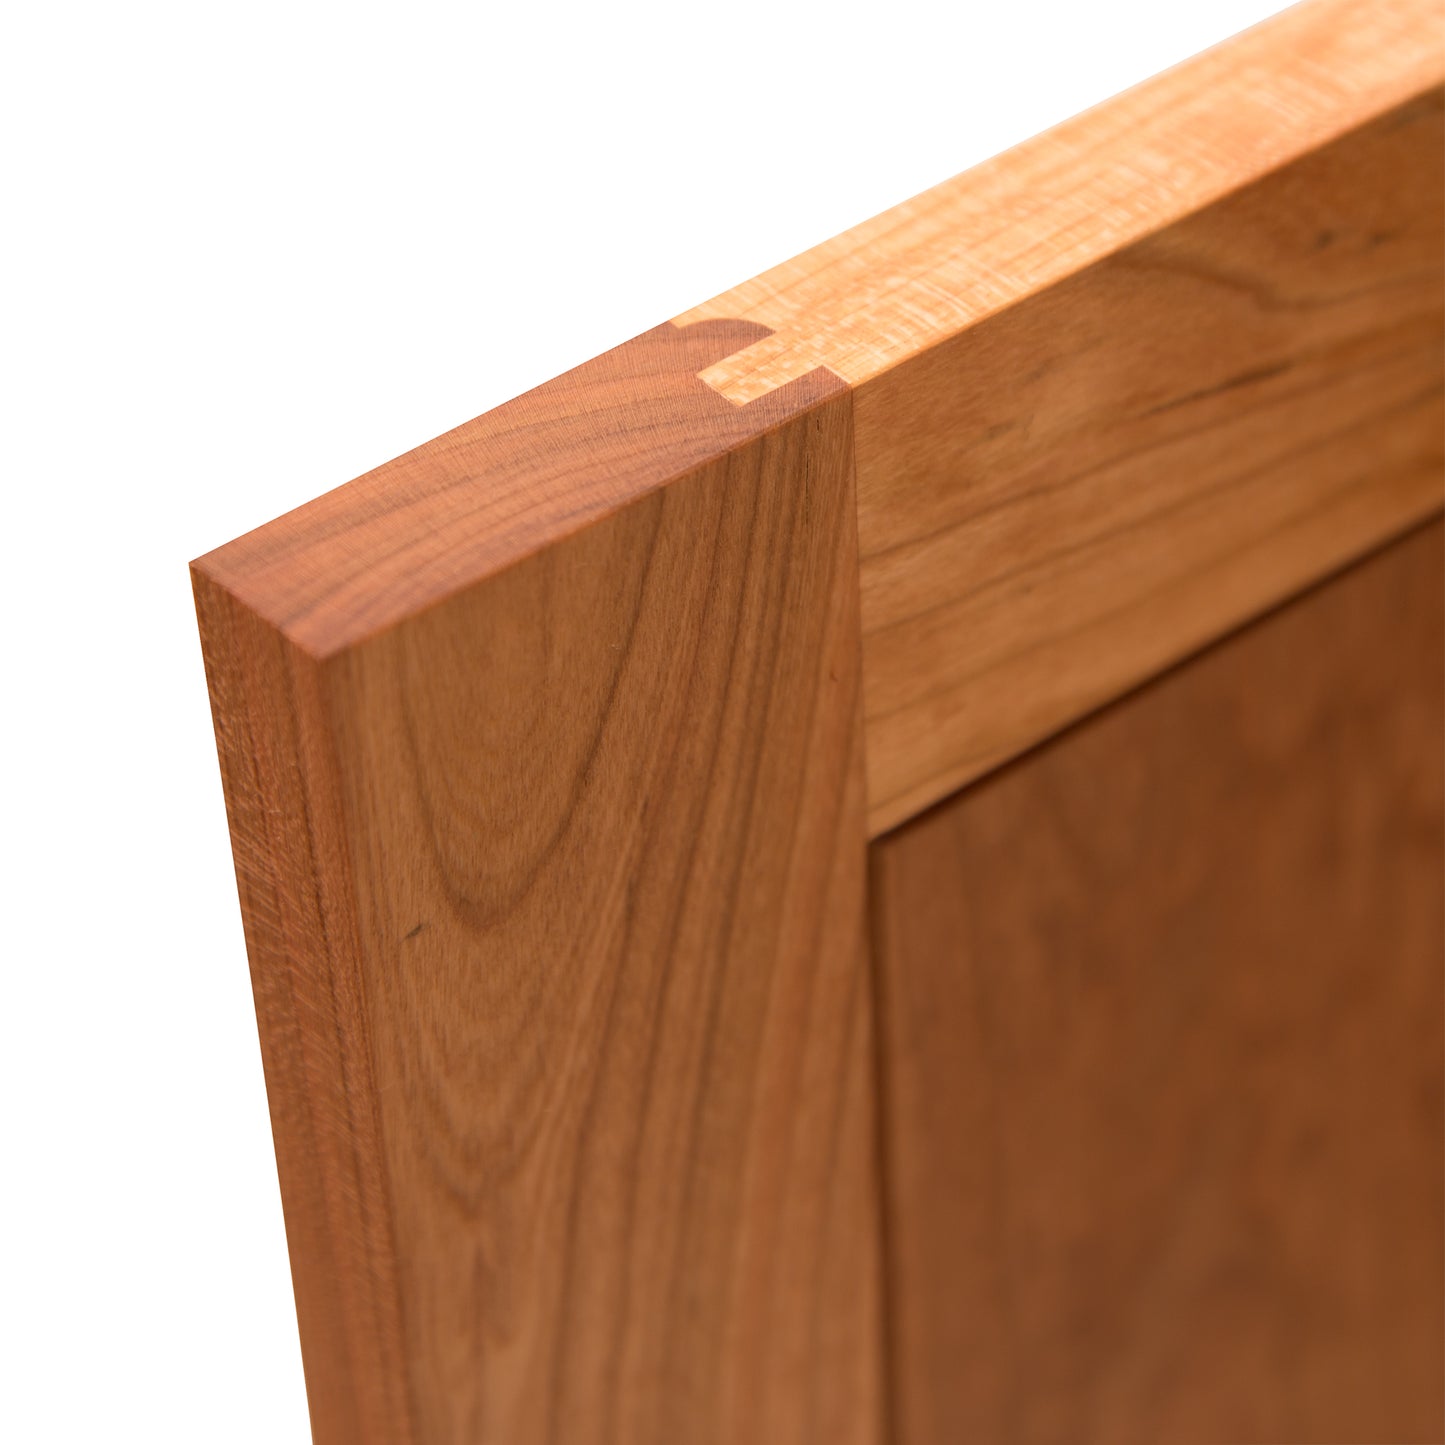 A close up view of a Maple Corner Woodworks Cherry Moon Small 38" Sideboard with extra storage options.